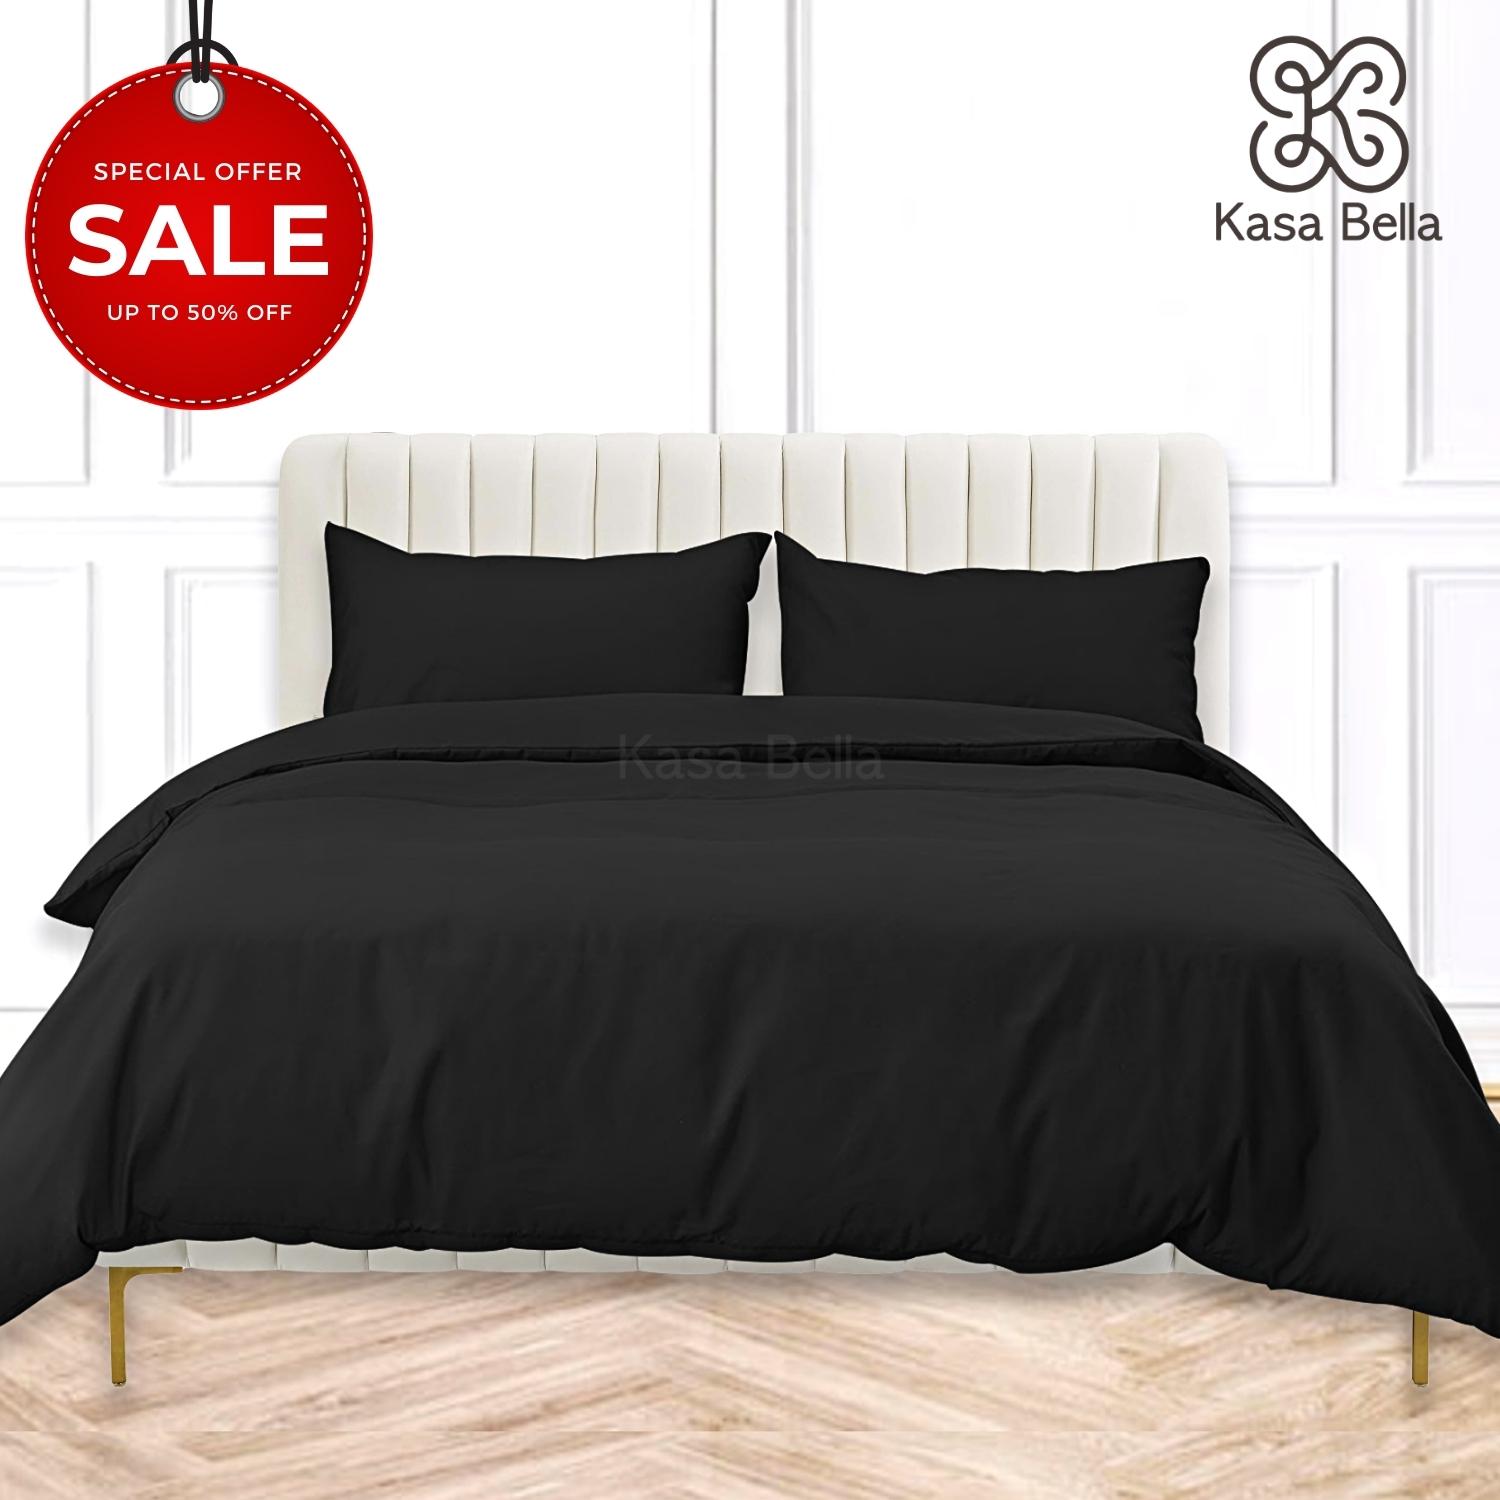 Plain Cover fitted Bedding Set Cotton Single Double King Bed Sheet 2Pillow Cases 